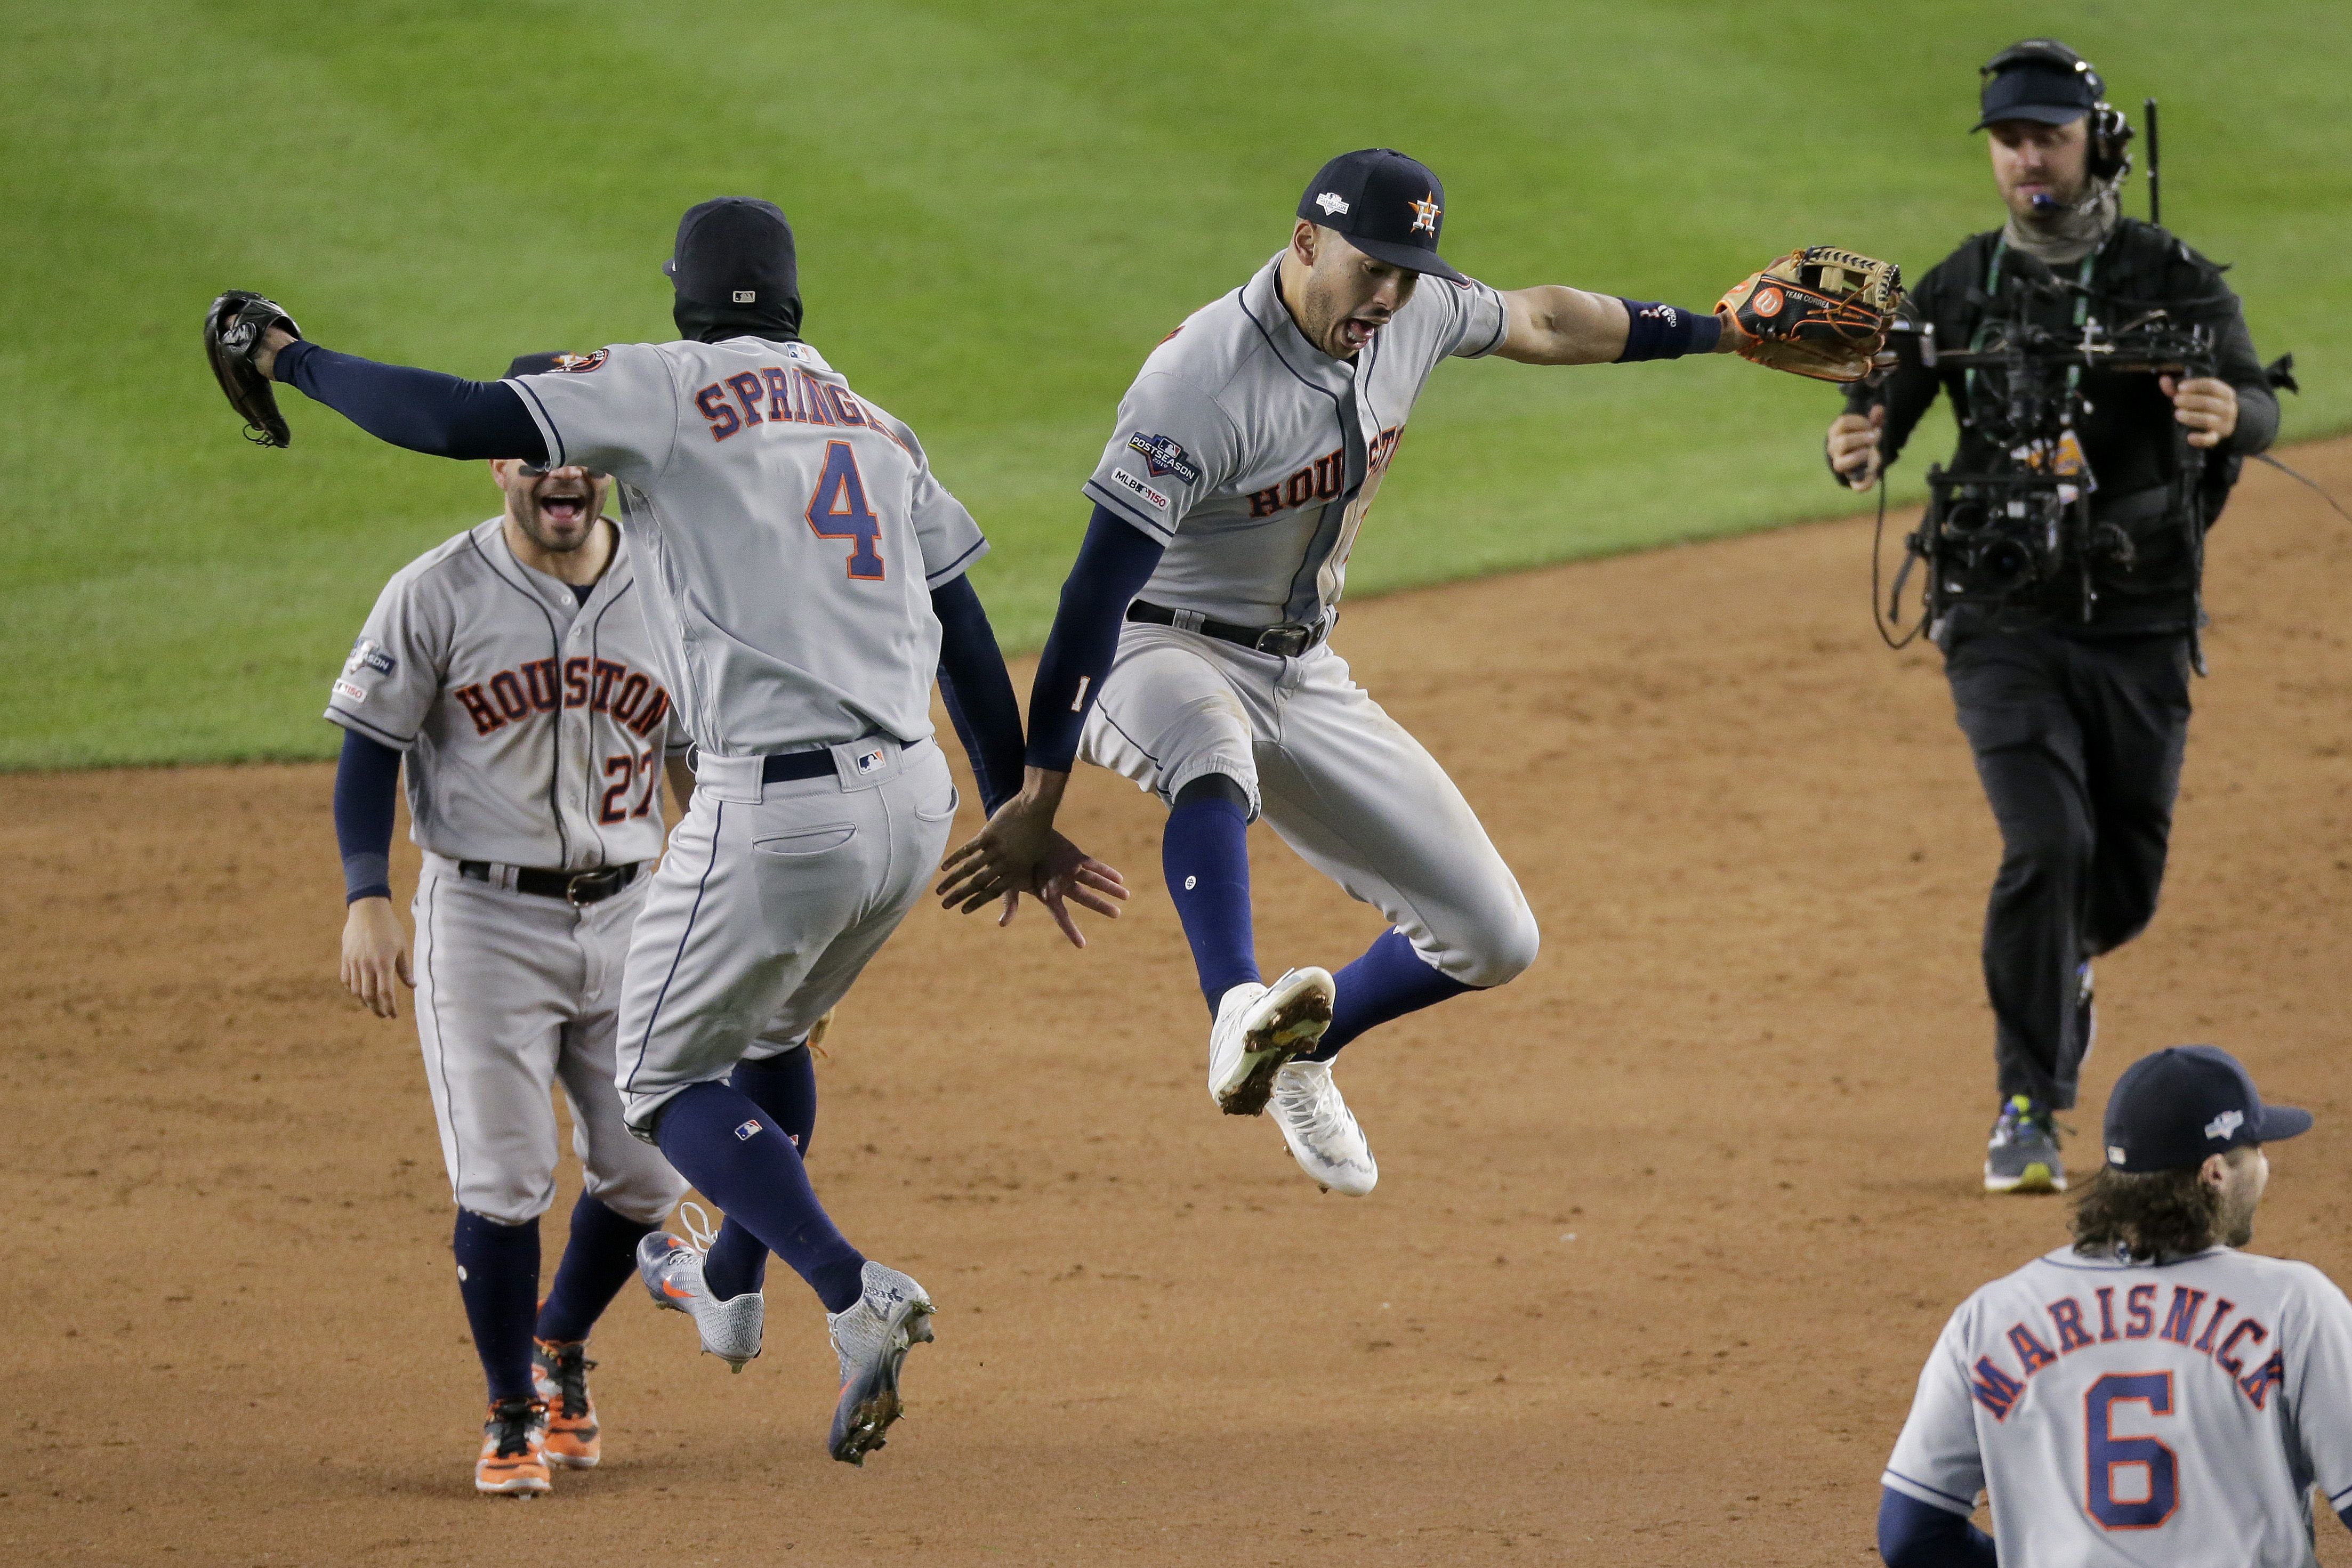 ALCS Game 2: Correa's 11th-inning walk-off HR gives Astros win over Yankees  